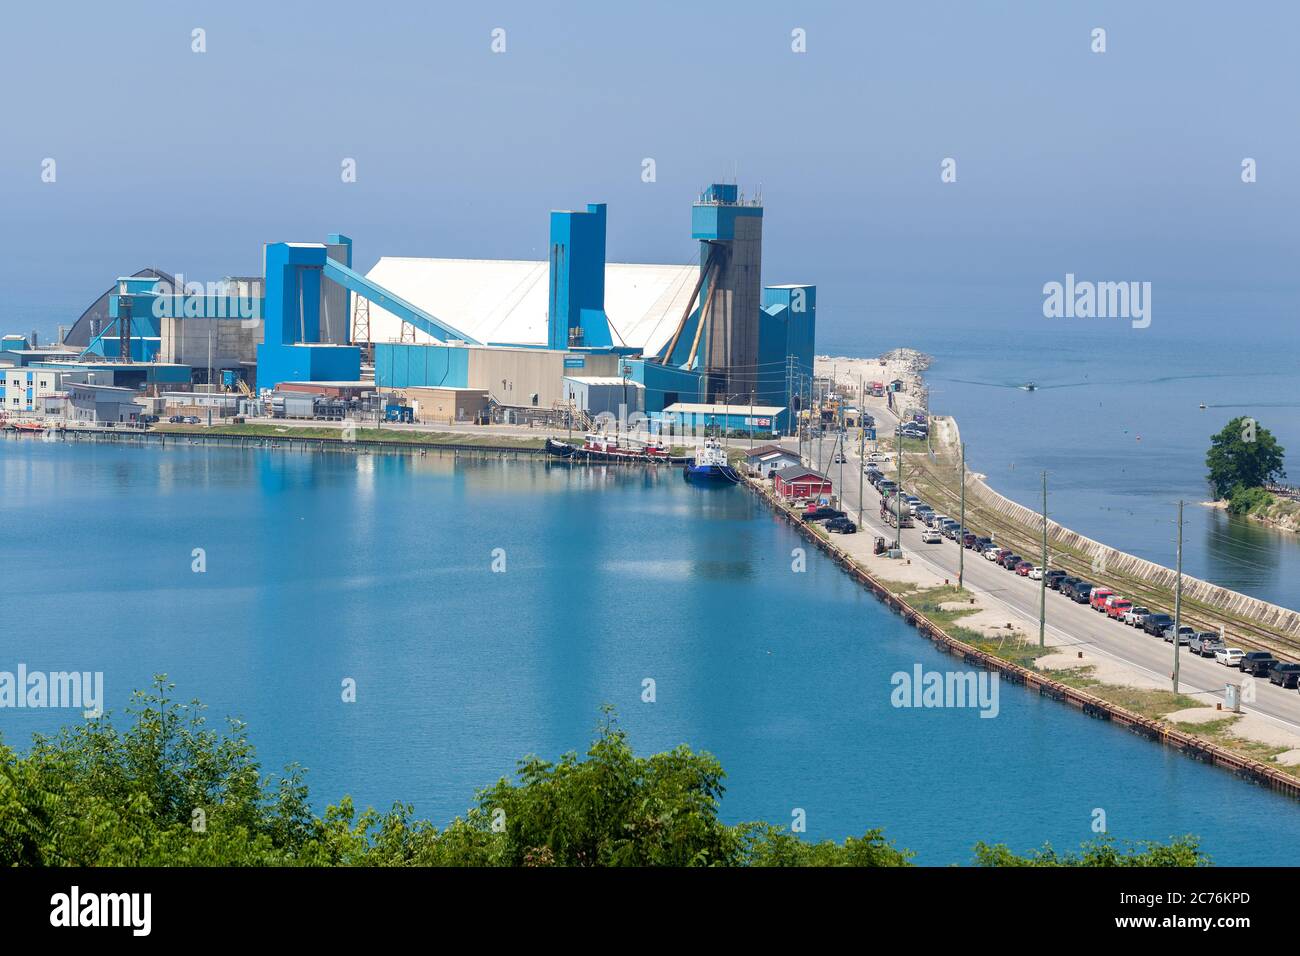 Goderich Sifto Salt Mine One of the Largest Salt Mines in the World Lake Huron Goderich Harbour Ontario Canada Stock Photo